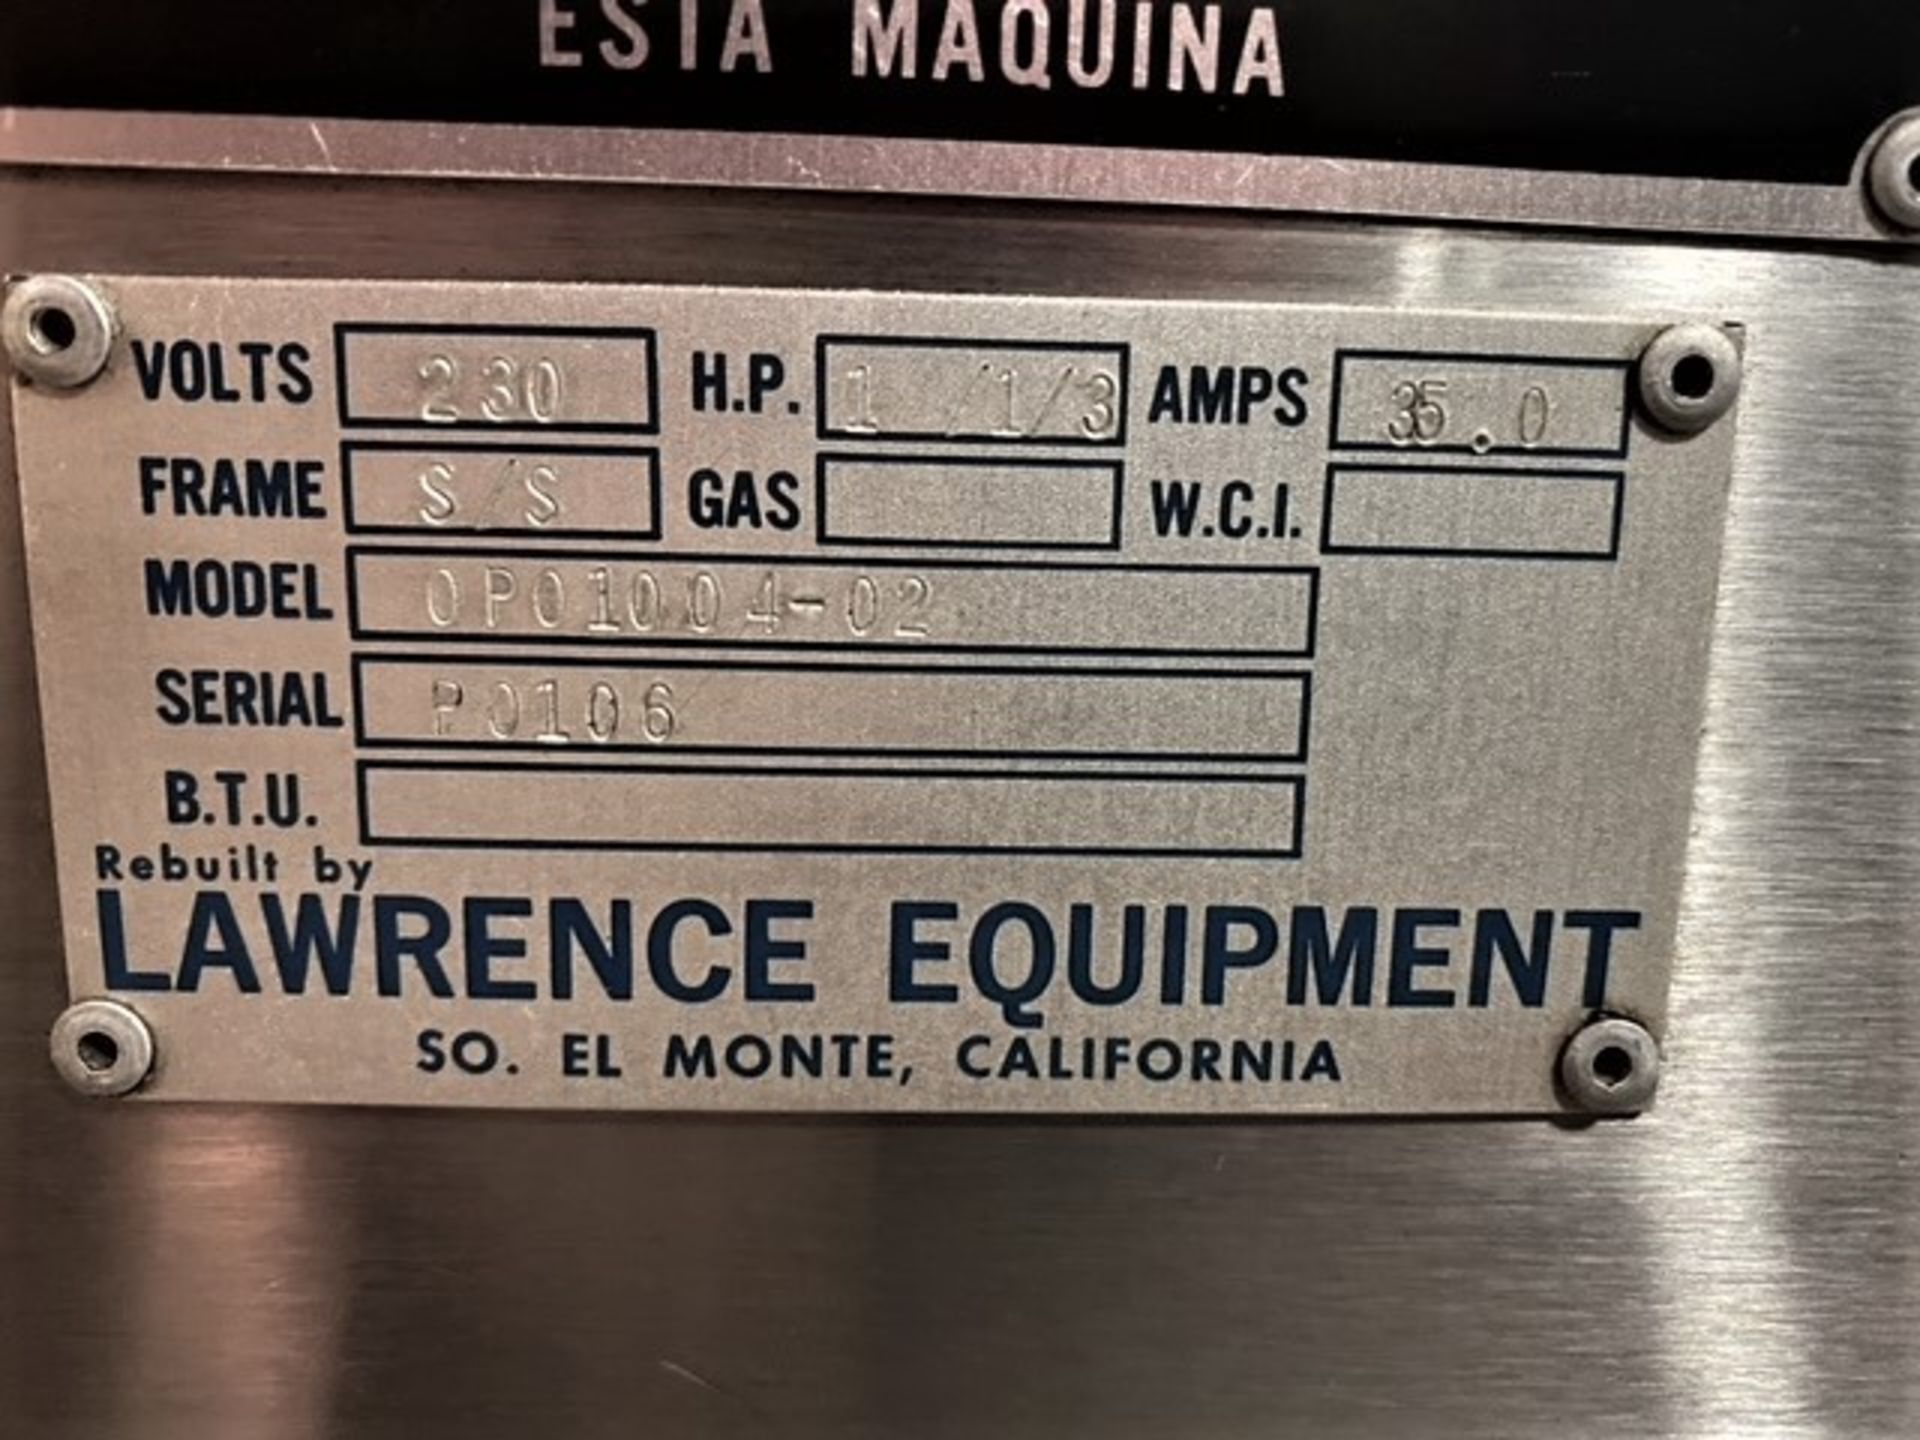 Lawrence Equipment Microcombo, Model 0P01004-02, S/N P0106, 230 V, 1 / 1/3 hp (Located Orlando, FL) - Image 2 of 2